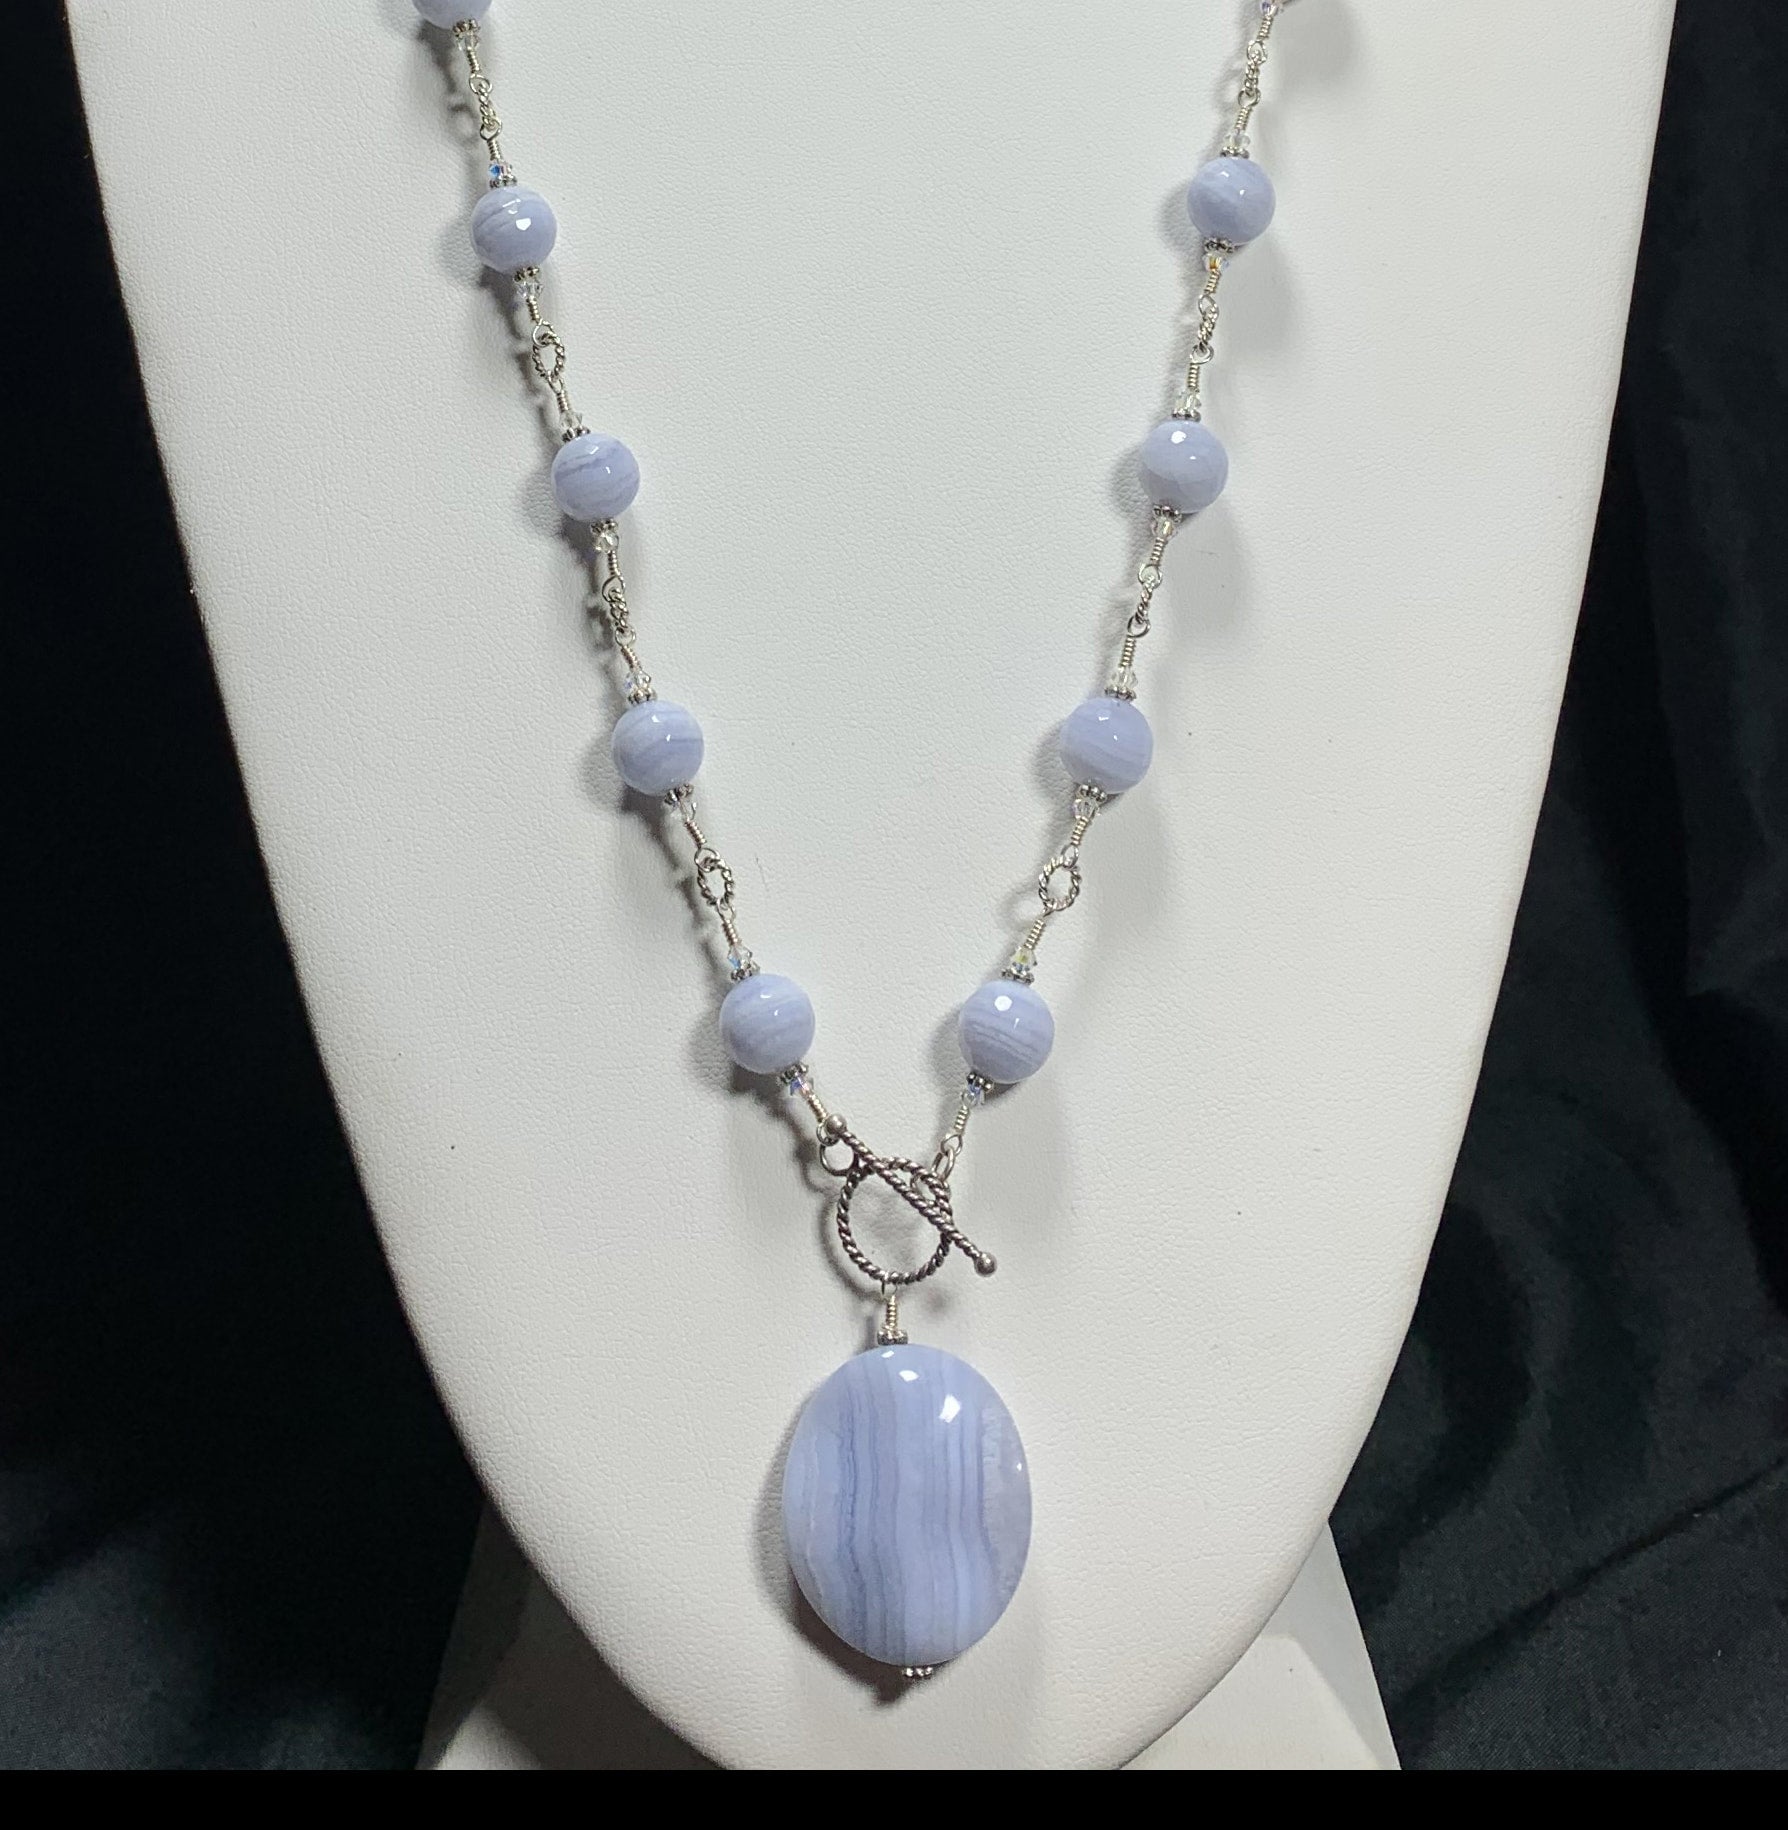 Natural Blue Lace Agate Necklace 3 Strand Genuine Beads